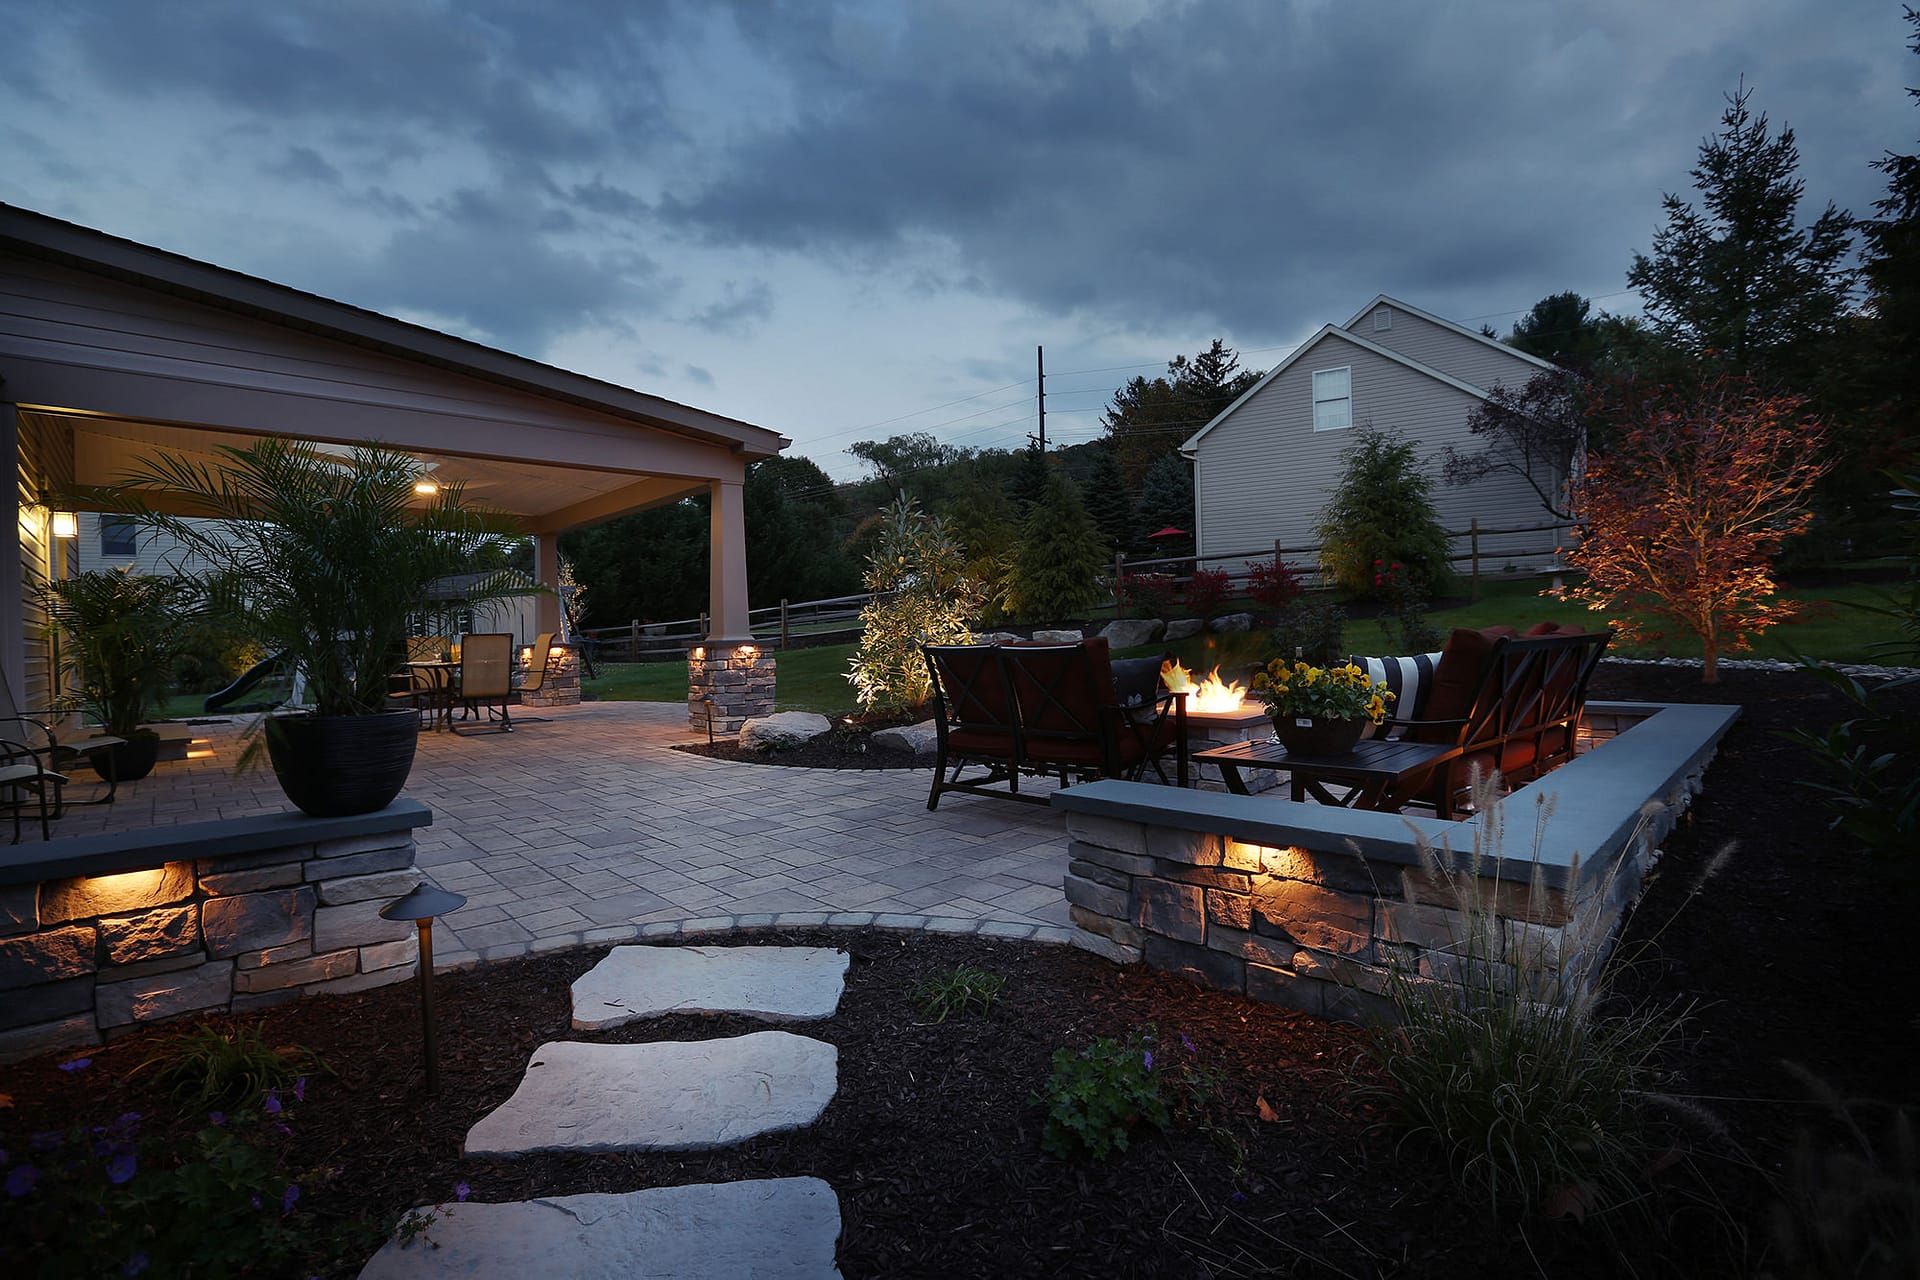 This stone wall doubles as wrap around seating for the fire pit.